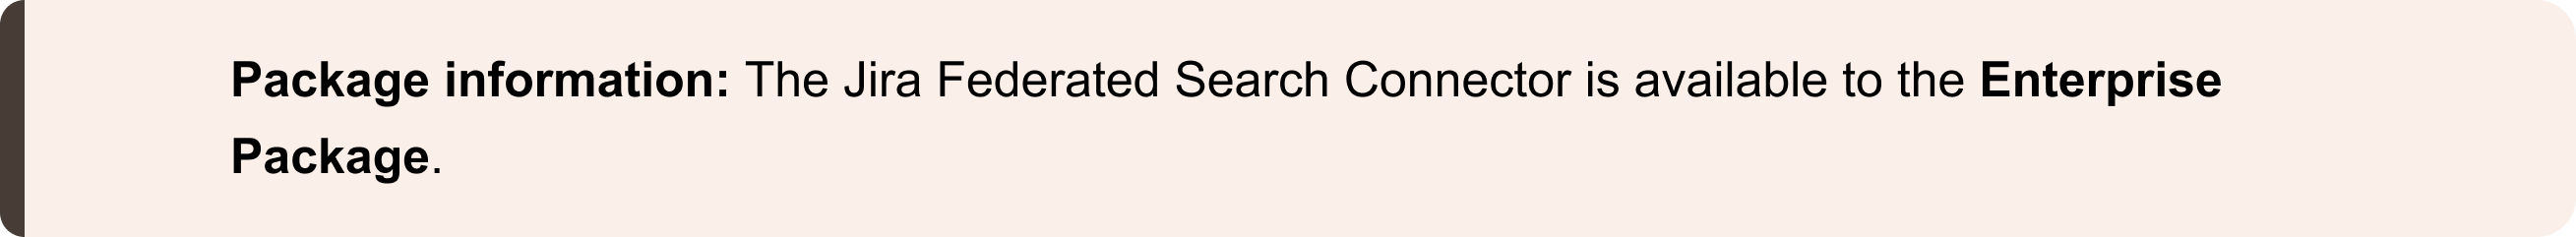 Jira_Federated_Search_Connector_1.png